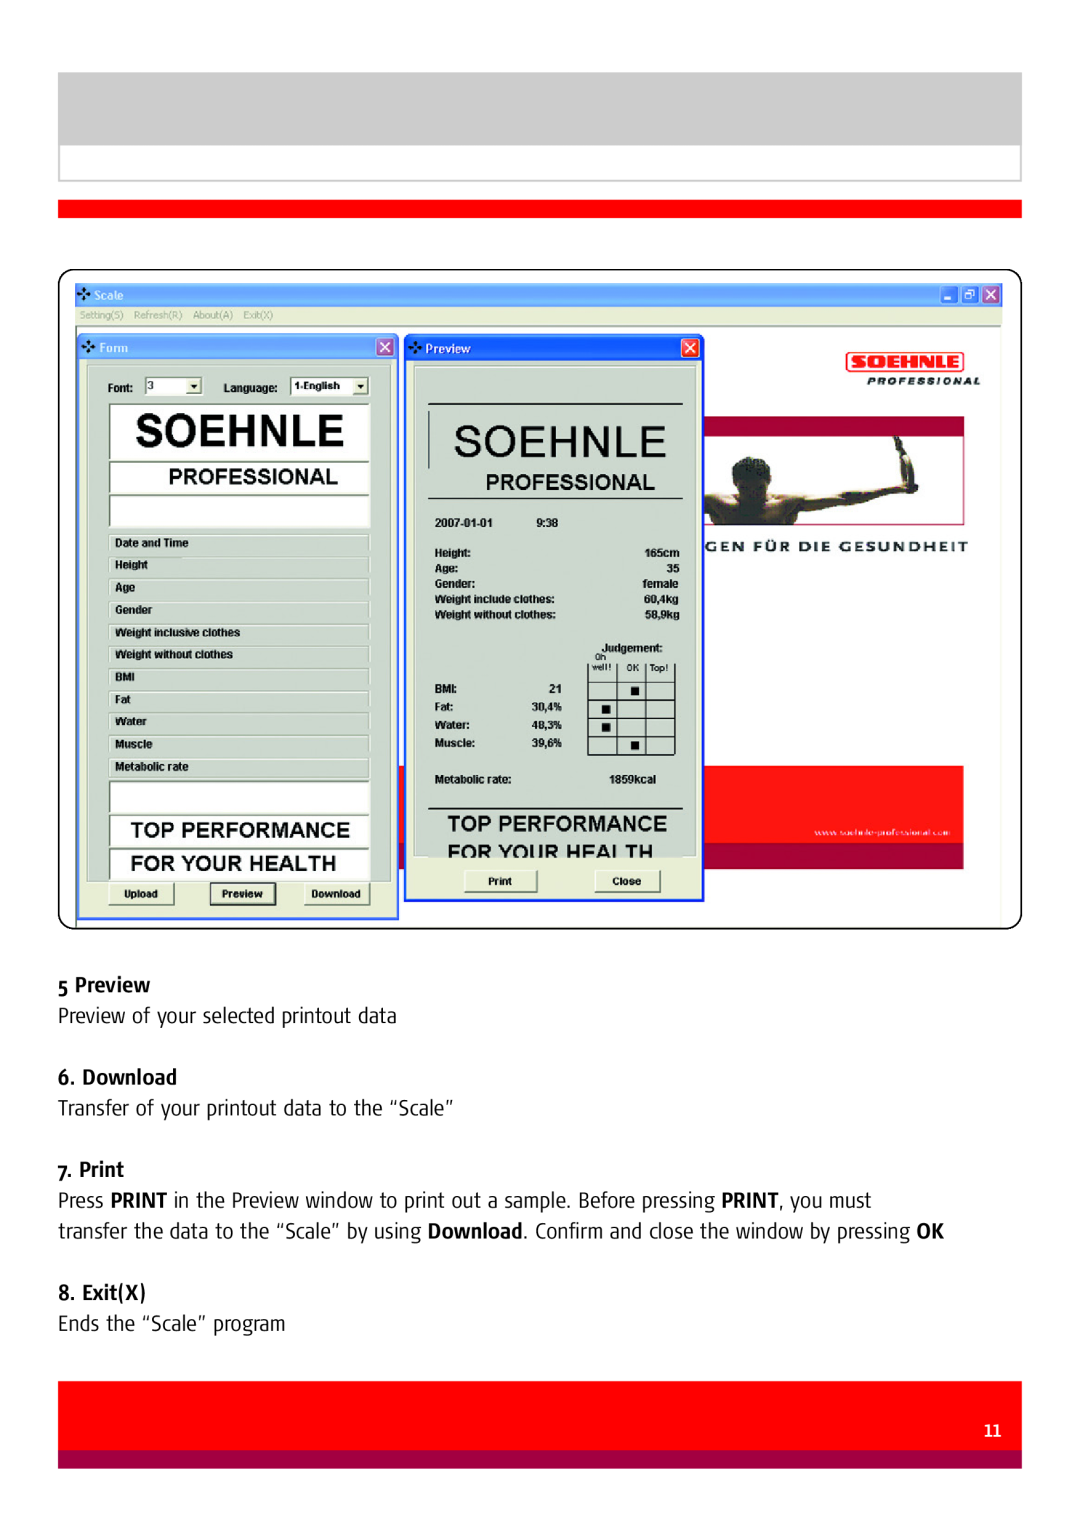 Soehnle 7850 manual Download, Print, ExitX, Preview of your selected printout data, Ends the “Scale” program 